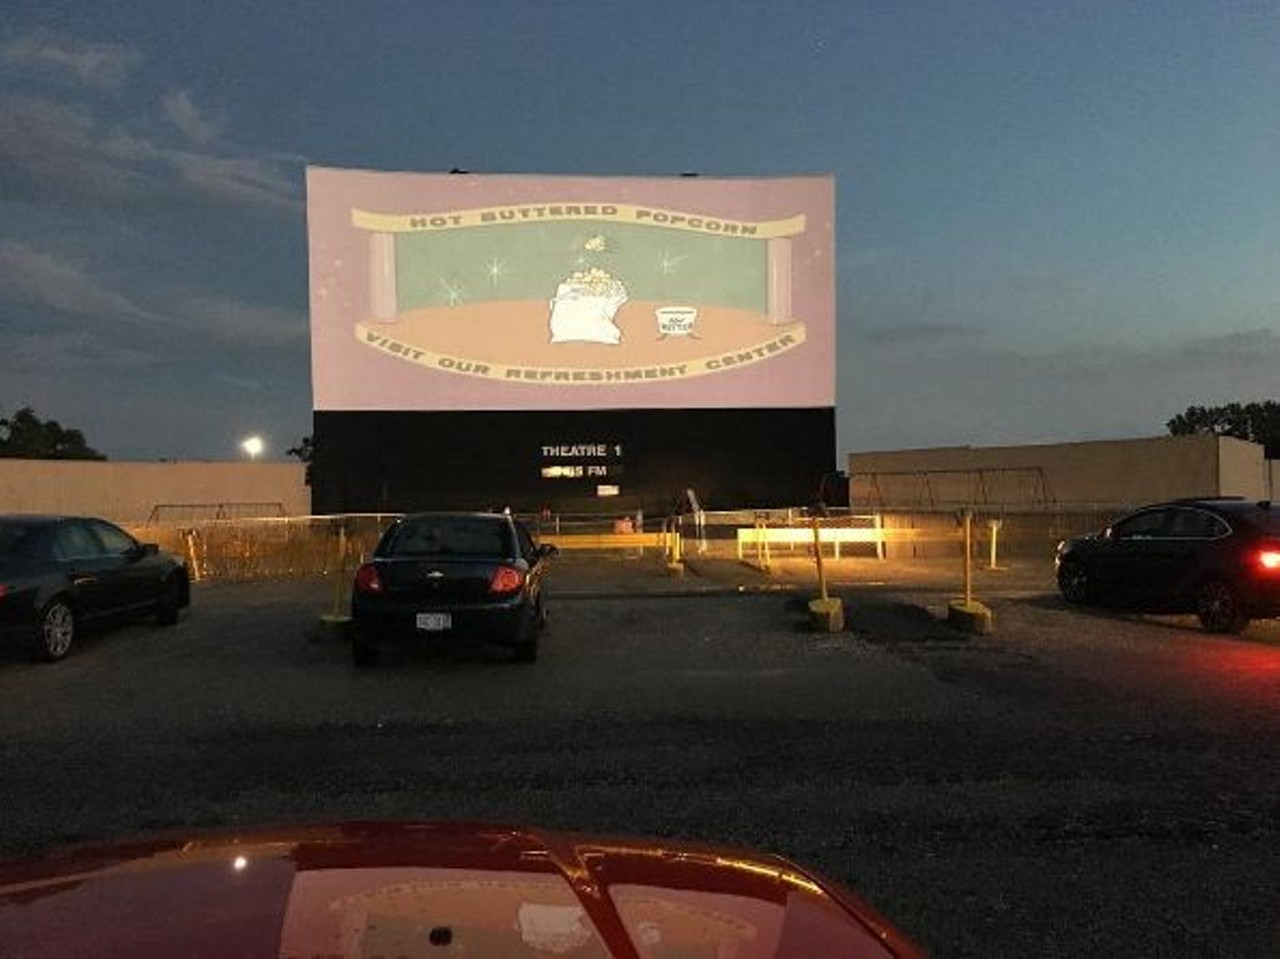 Ford-Wyoming Drive-In &#151; If you have a full evening to spend, catch a double feature at the drive-in for the price of one movie. If you've never been to the drive-in, there really isn't a comparable experience. You get your own private audio and you don't have to worry about someone disrupting your movie-watching experience. You can bring whatever snacks you want and take other liberties you couldn't normally in a crowded theater. Just try not to fall asleep through the second movie.